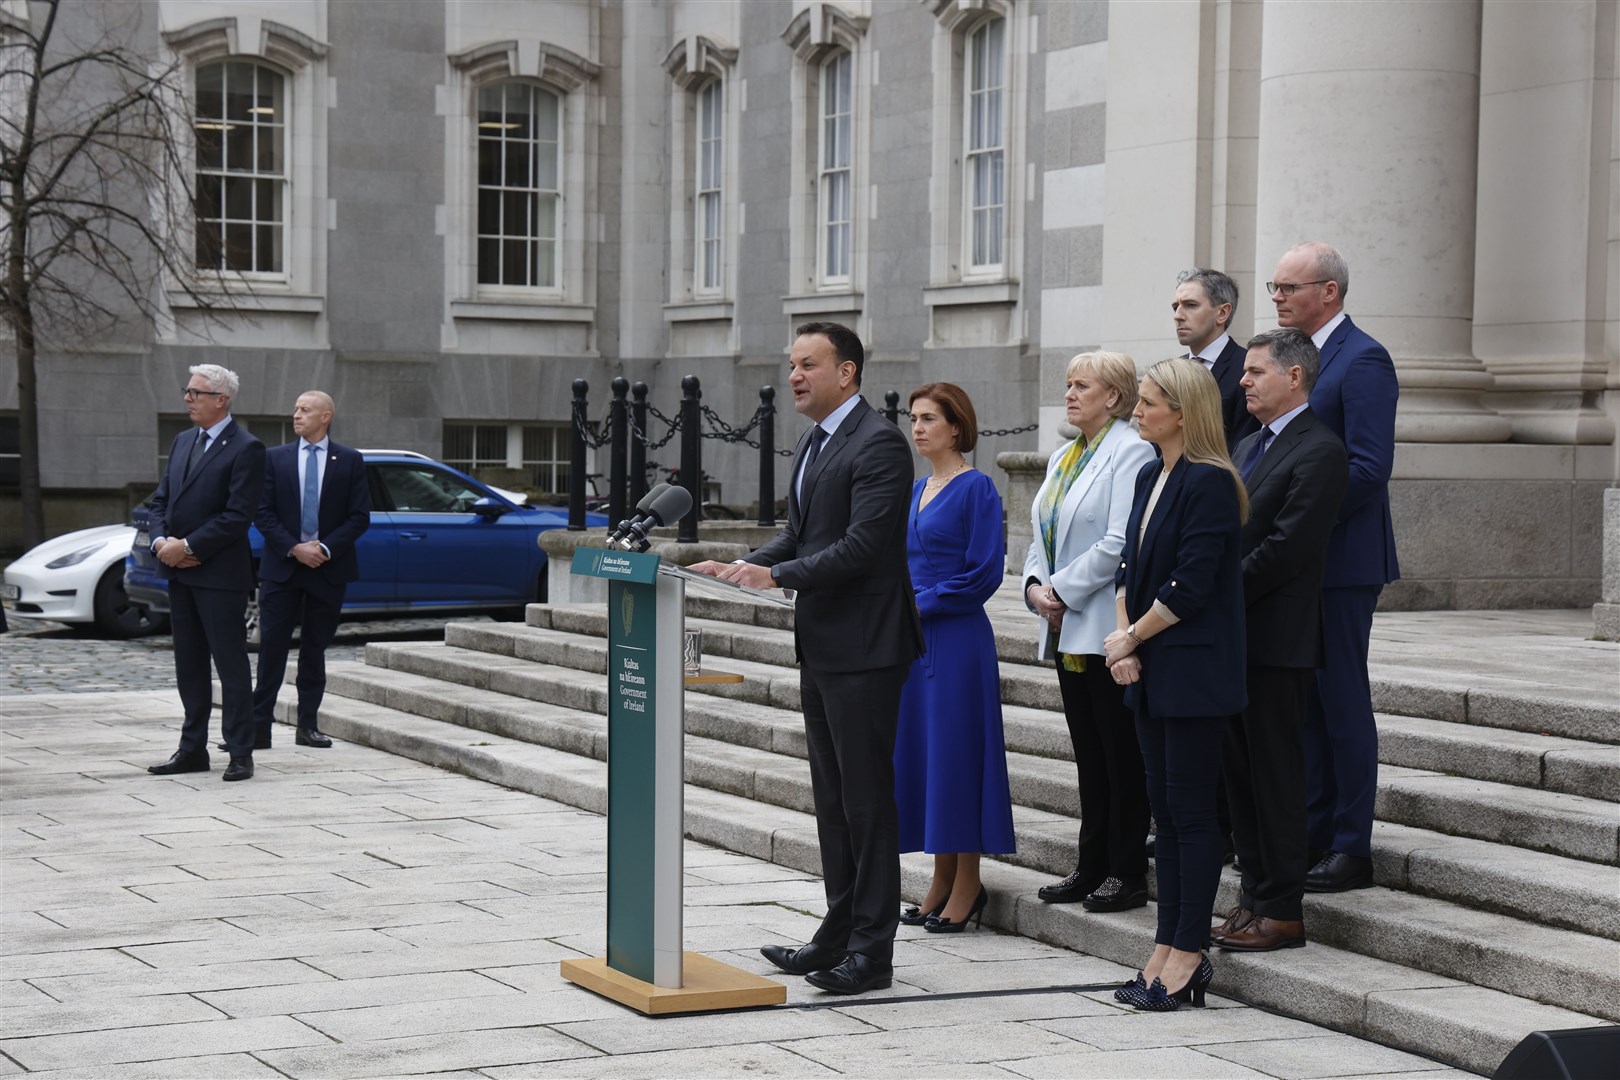 Taoiseach Leo Varadkar speaking to the media at Government Buildings in Dublin as he announced he was to step down as Taoiseach and as leader of his party Fine Gael (Nick Bradshaw/PA)